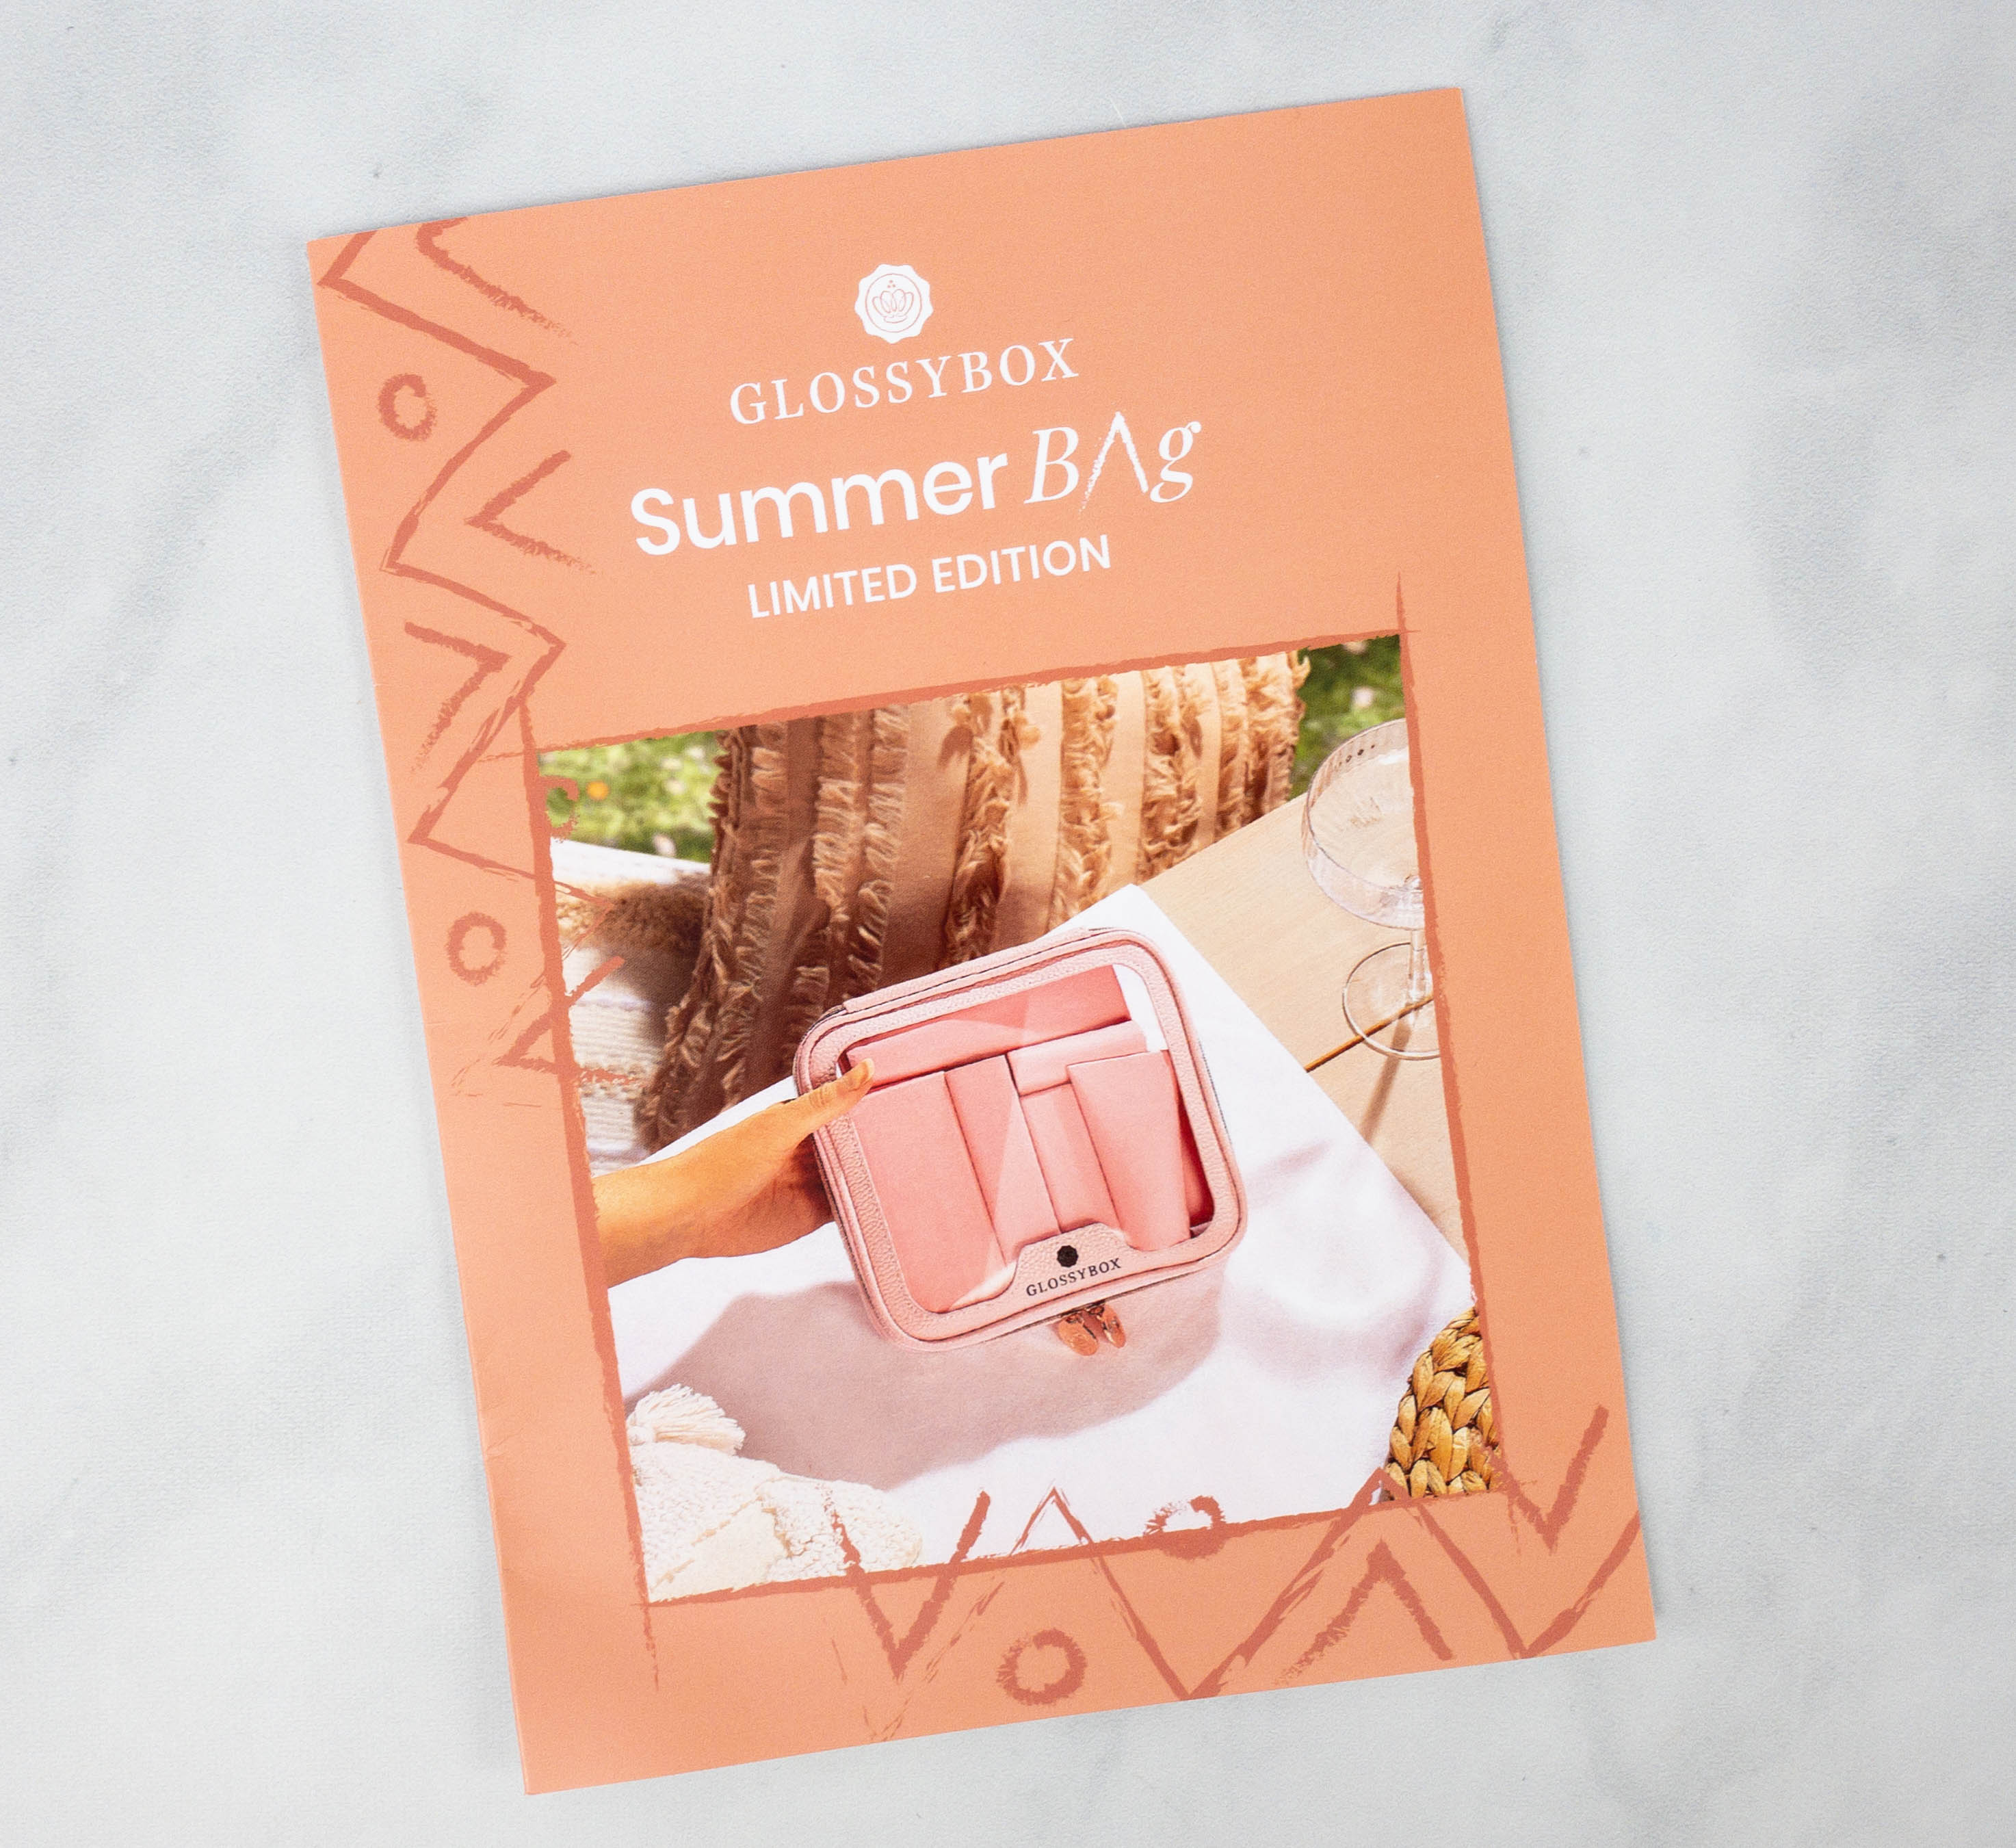 https://hellosubscription.com/wp-content/uploads/2021/06/glossybox-limited-edition-summer-2021-3.jpg?quality=90&strip=all